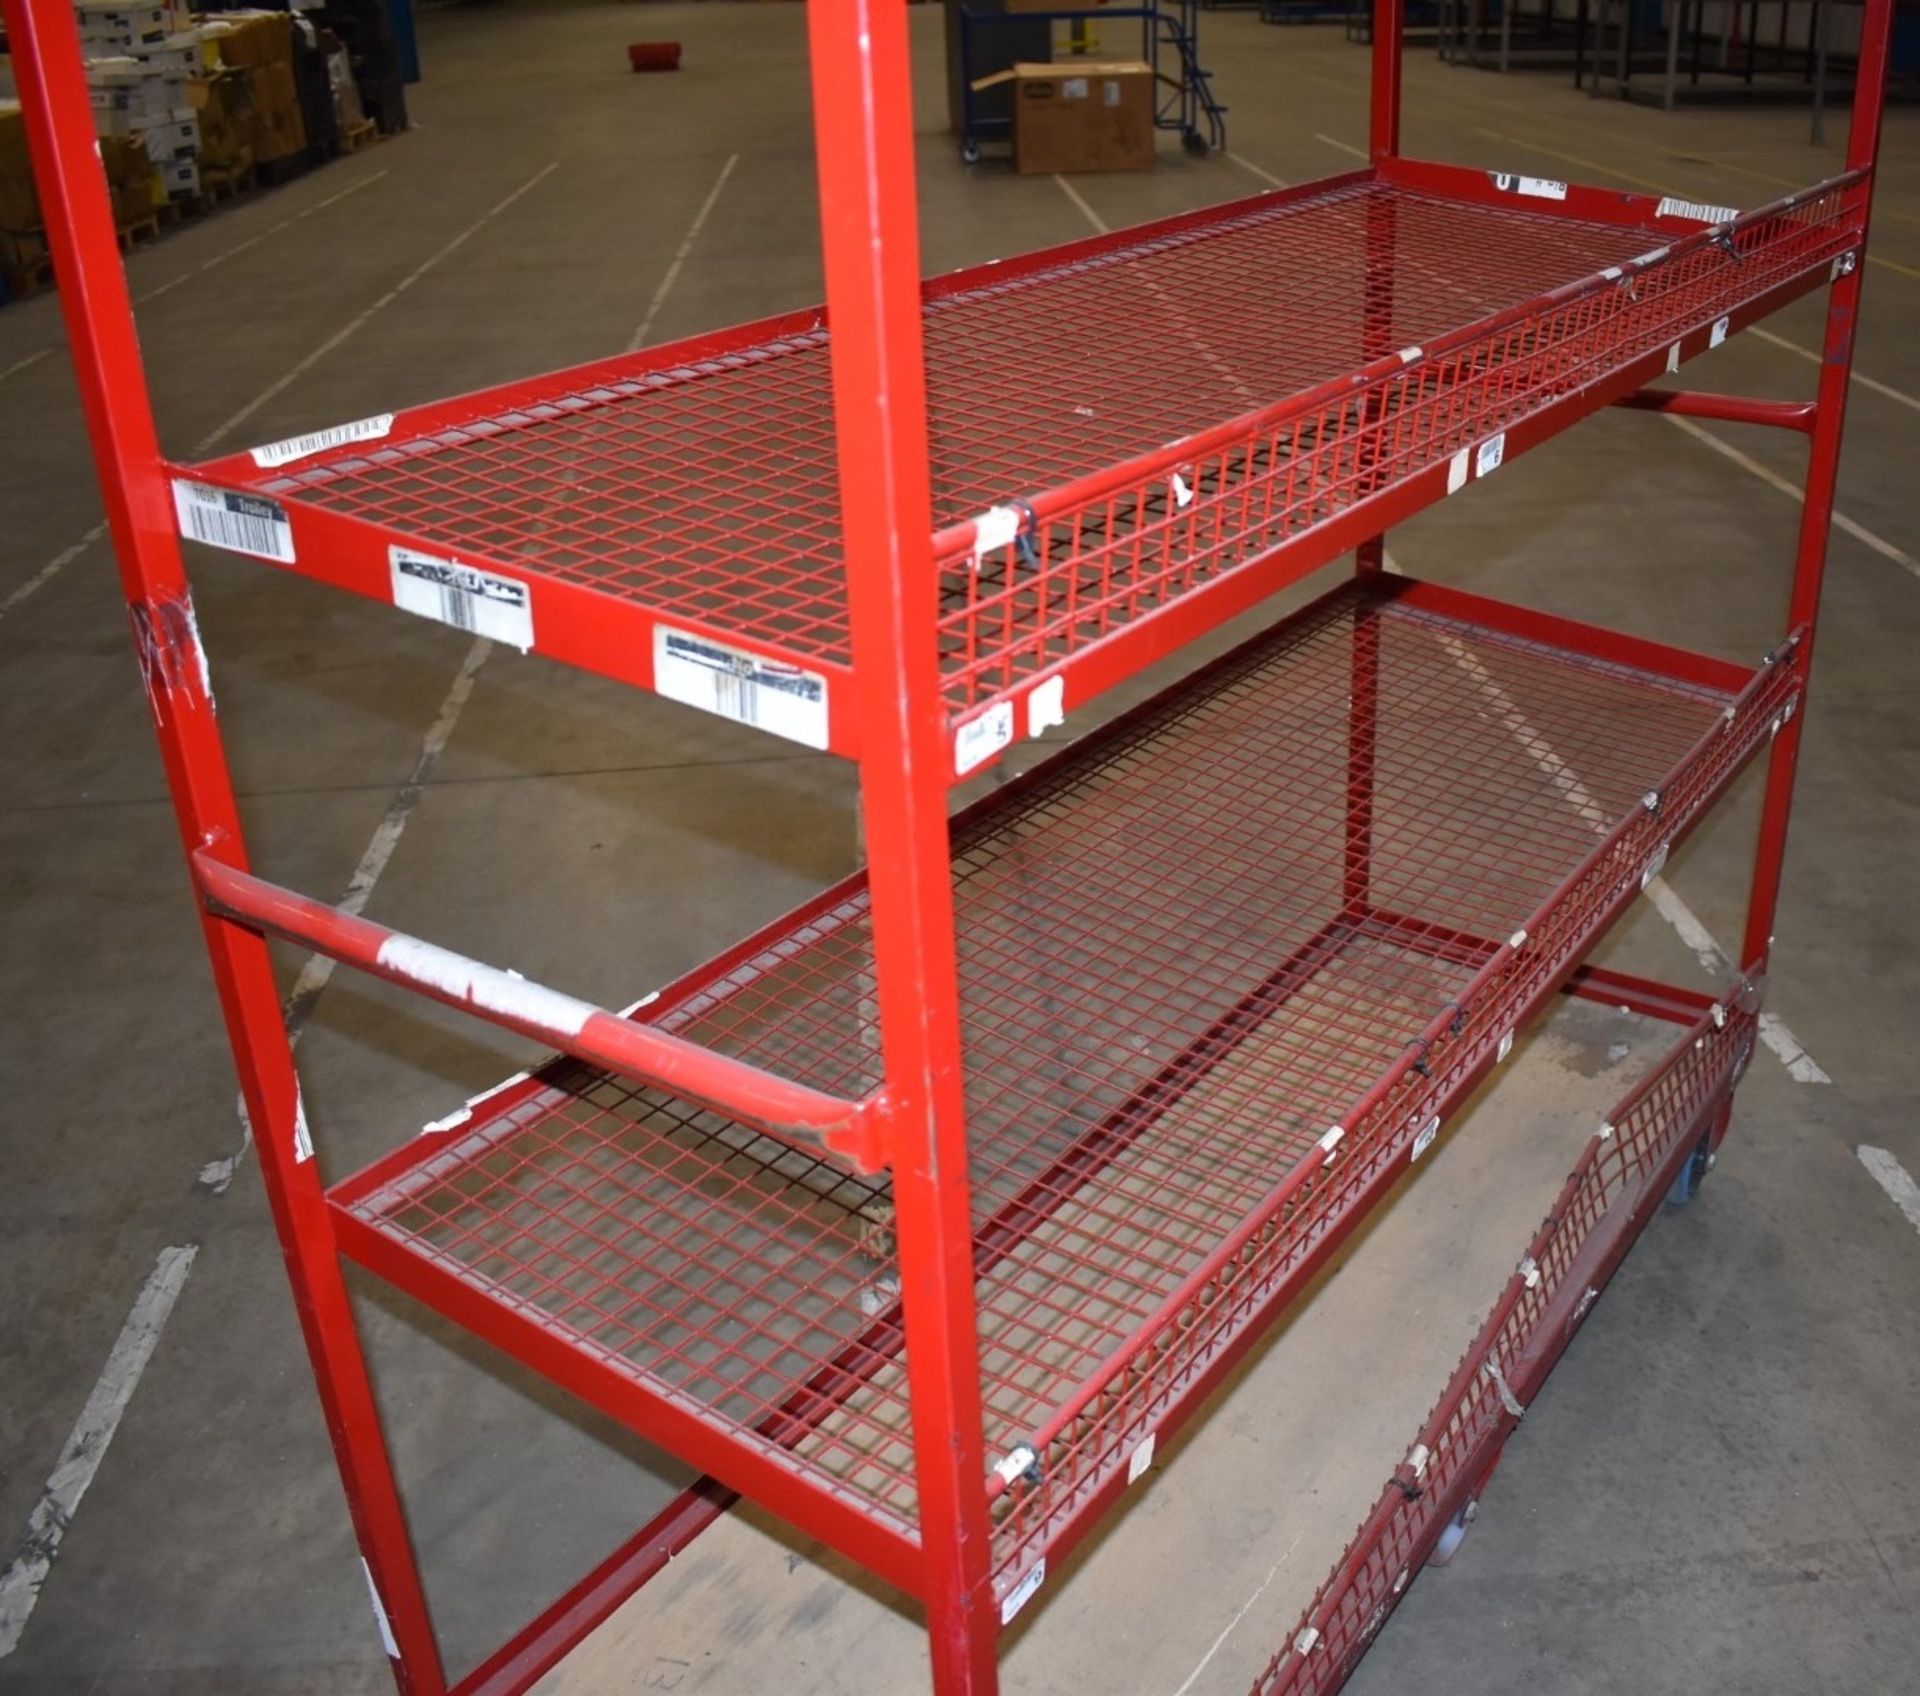 1 x Four Tier Metal Shelf Unit on Castors - Ideal For Warehouses or Offices etc - H180 x W160 x - Image 5 of 7